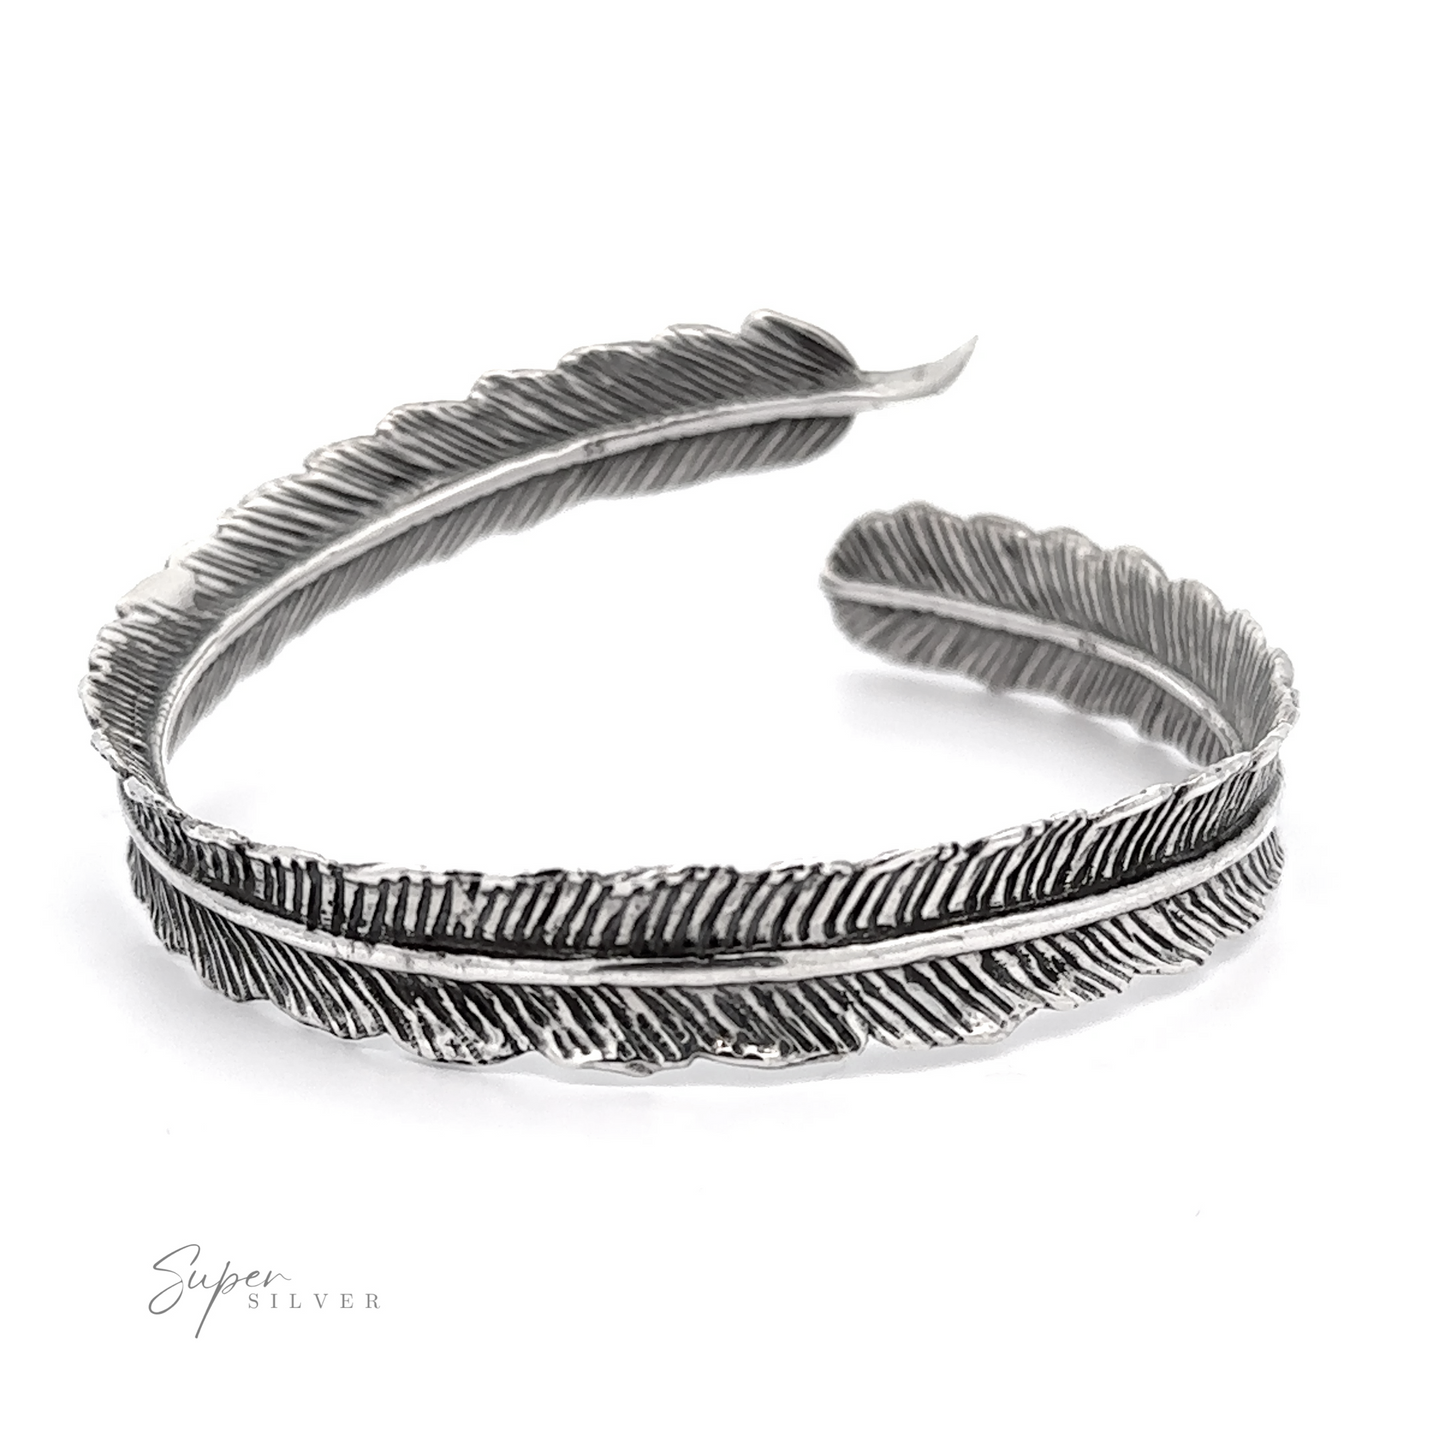 A .925 Sterling Silver Oxidized Feather Cuff Bracelet.